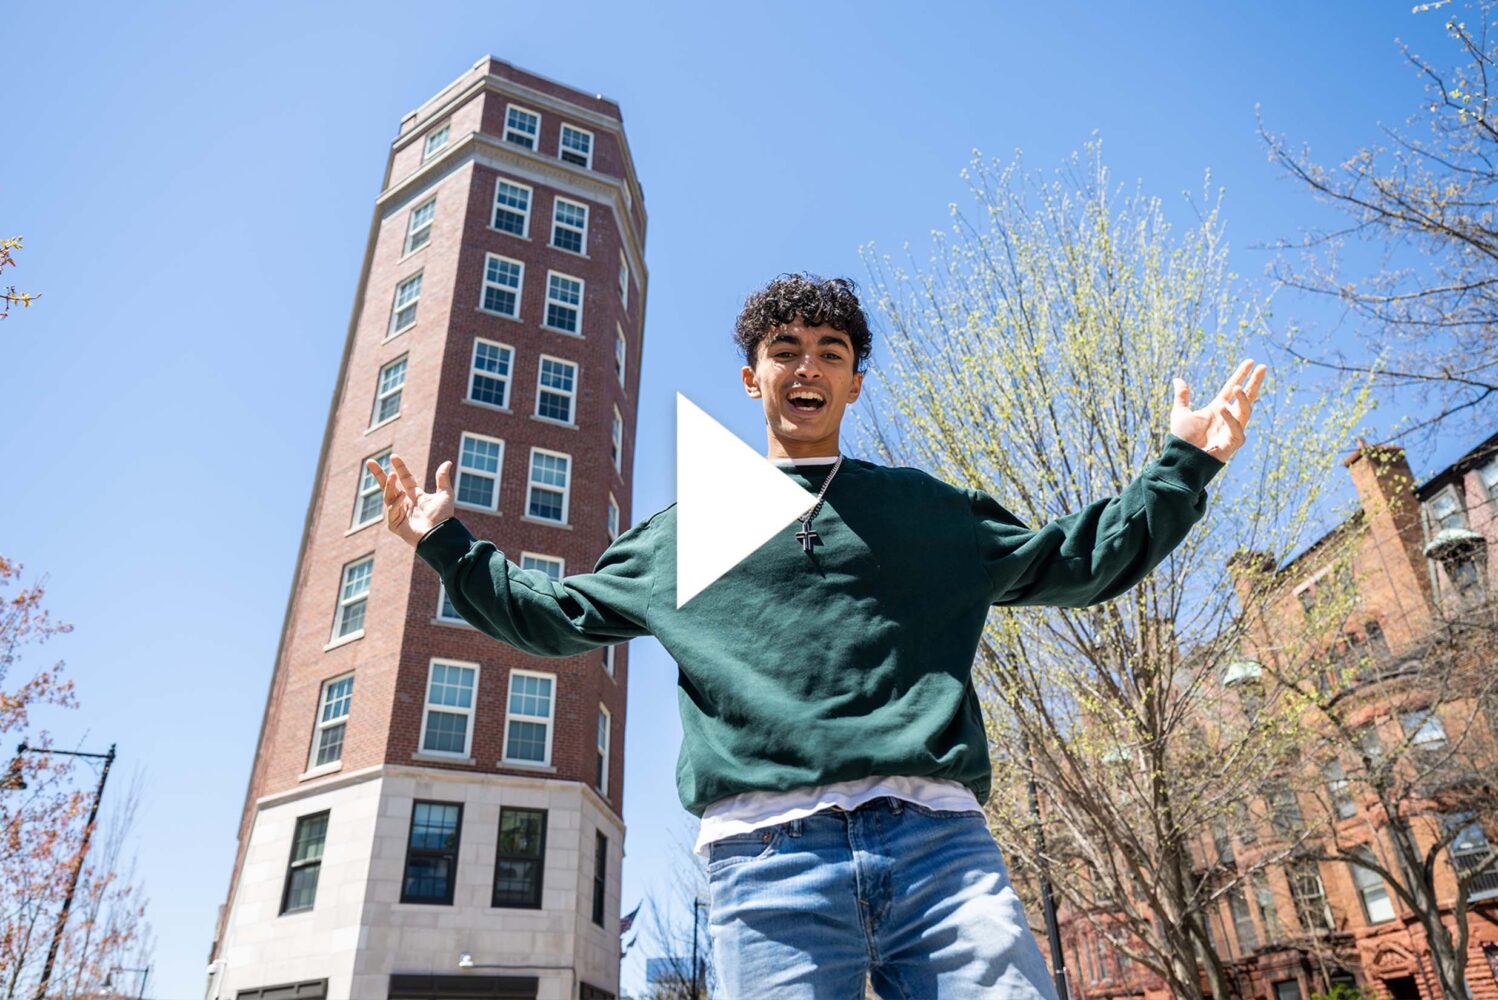 Photo: A picture of a male student posing in front of a dorm building in the city with his arms extended. There is a video play button over the image